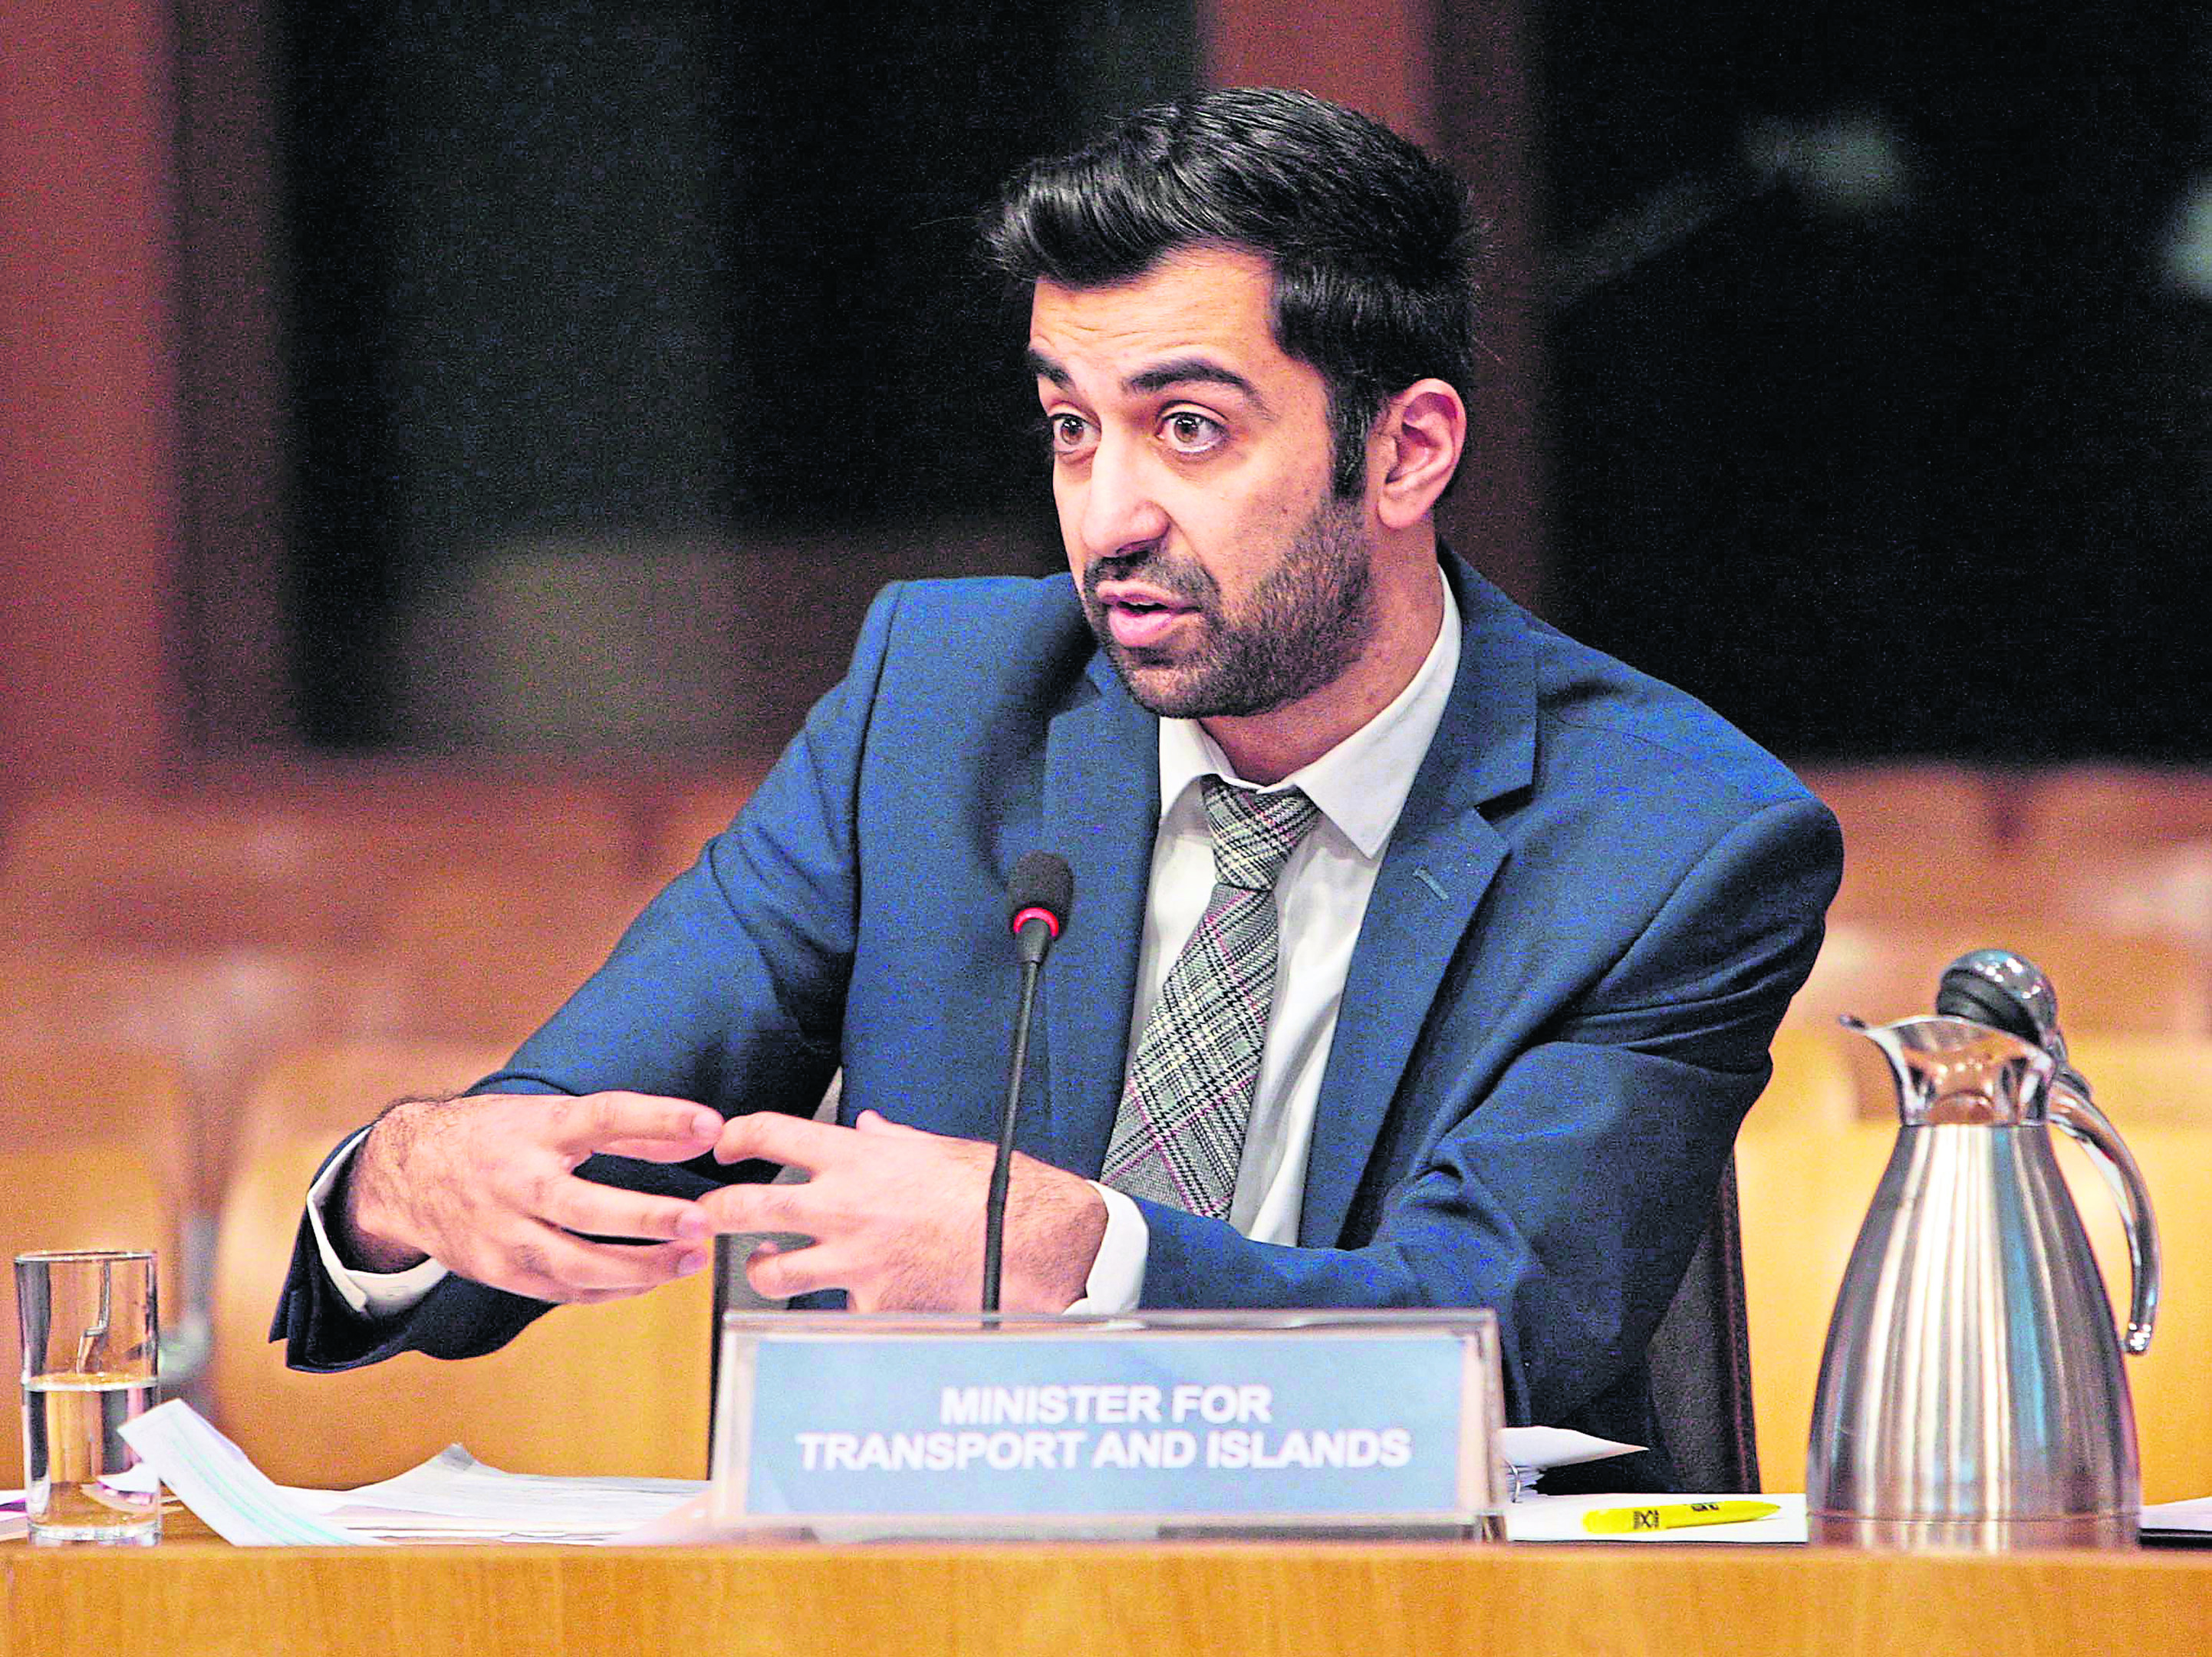 Humza Yousaf. Picture by Andrew Cowan/Scottish Parliament